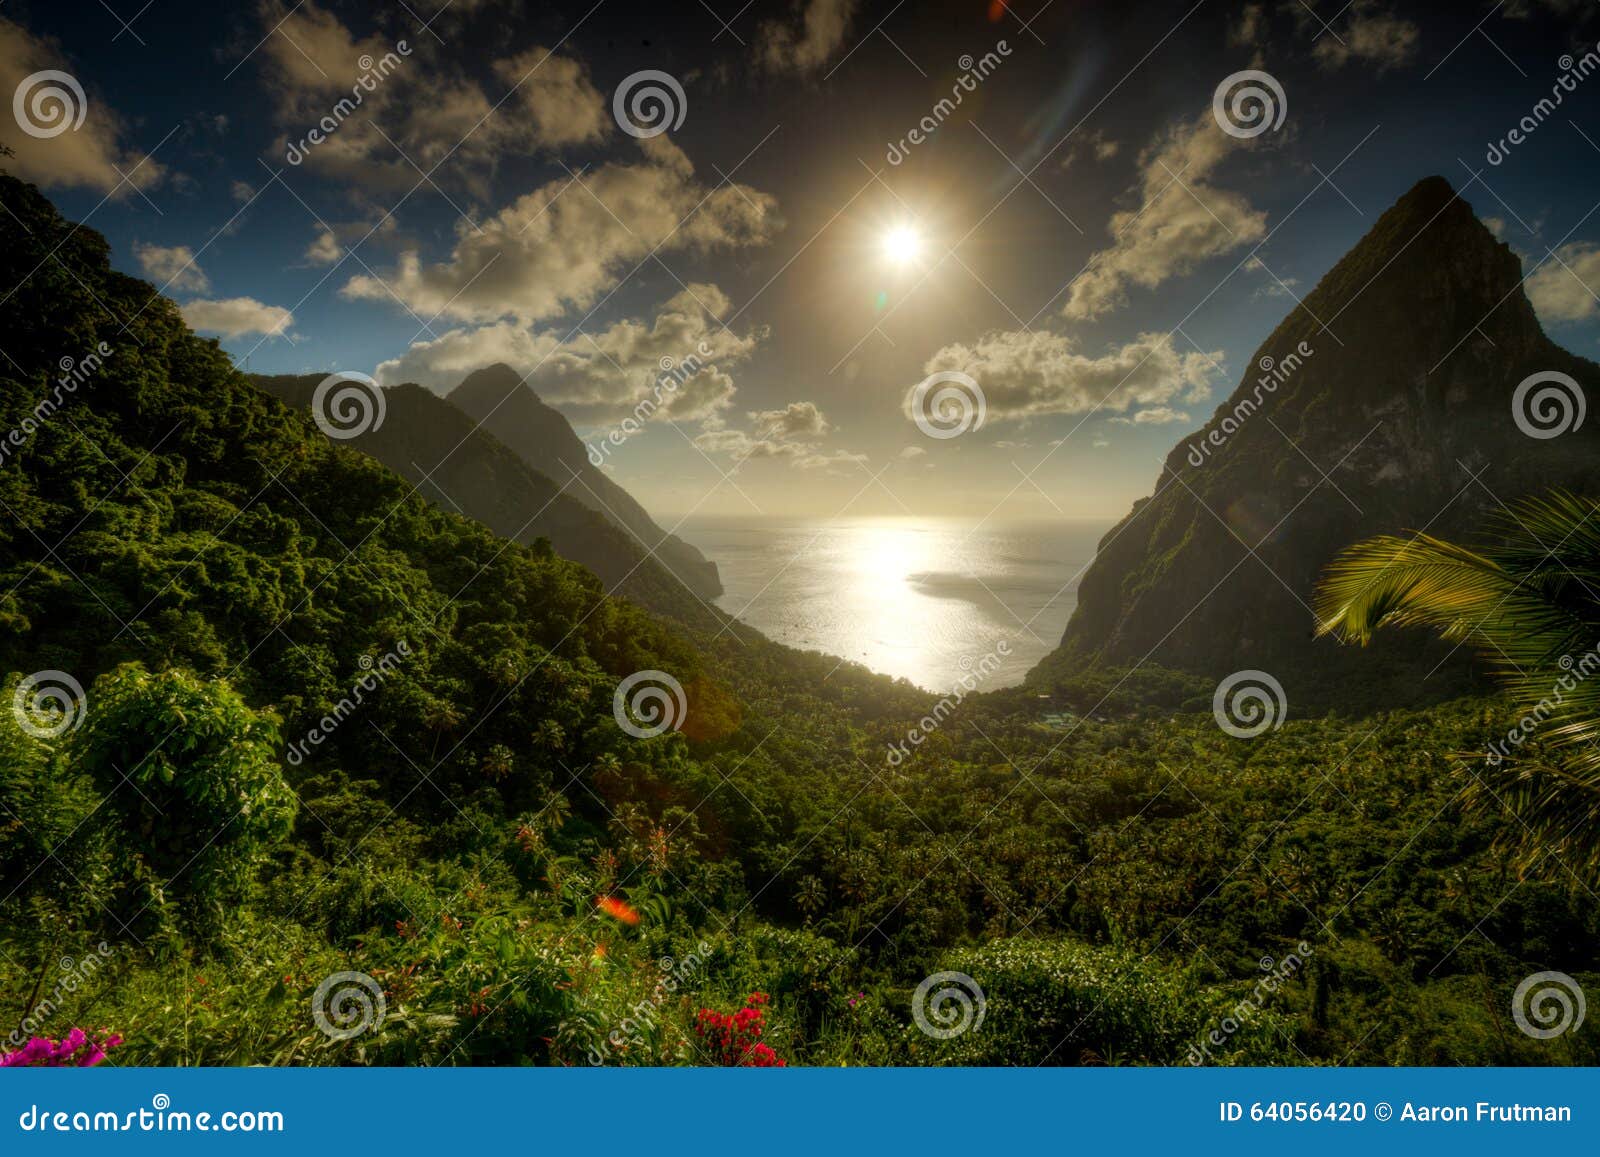 a view of the pitons in st. lucia